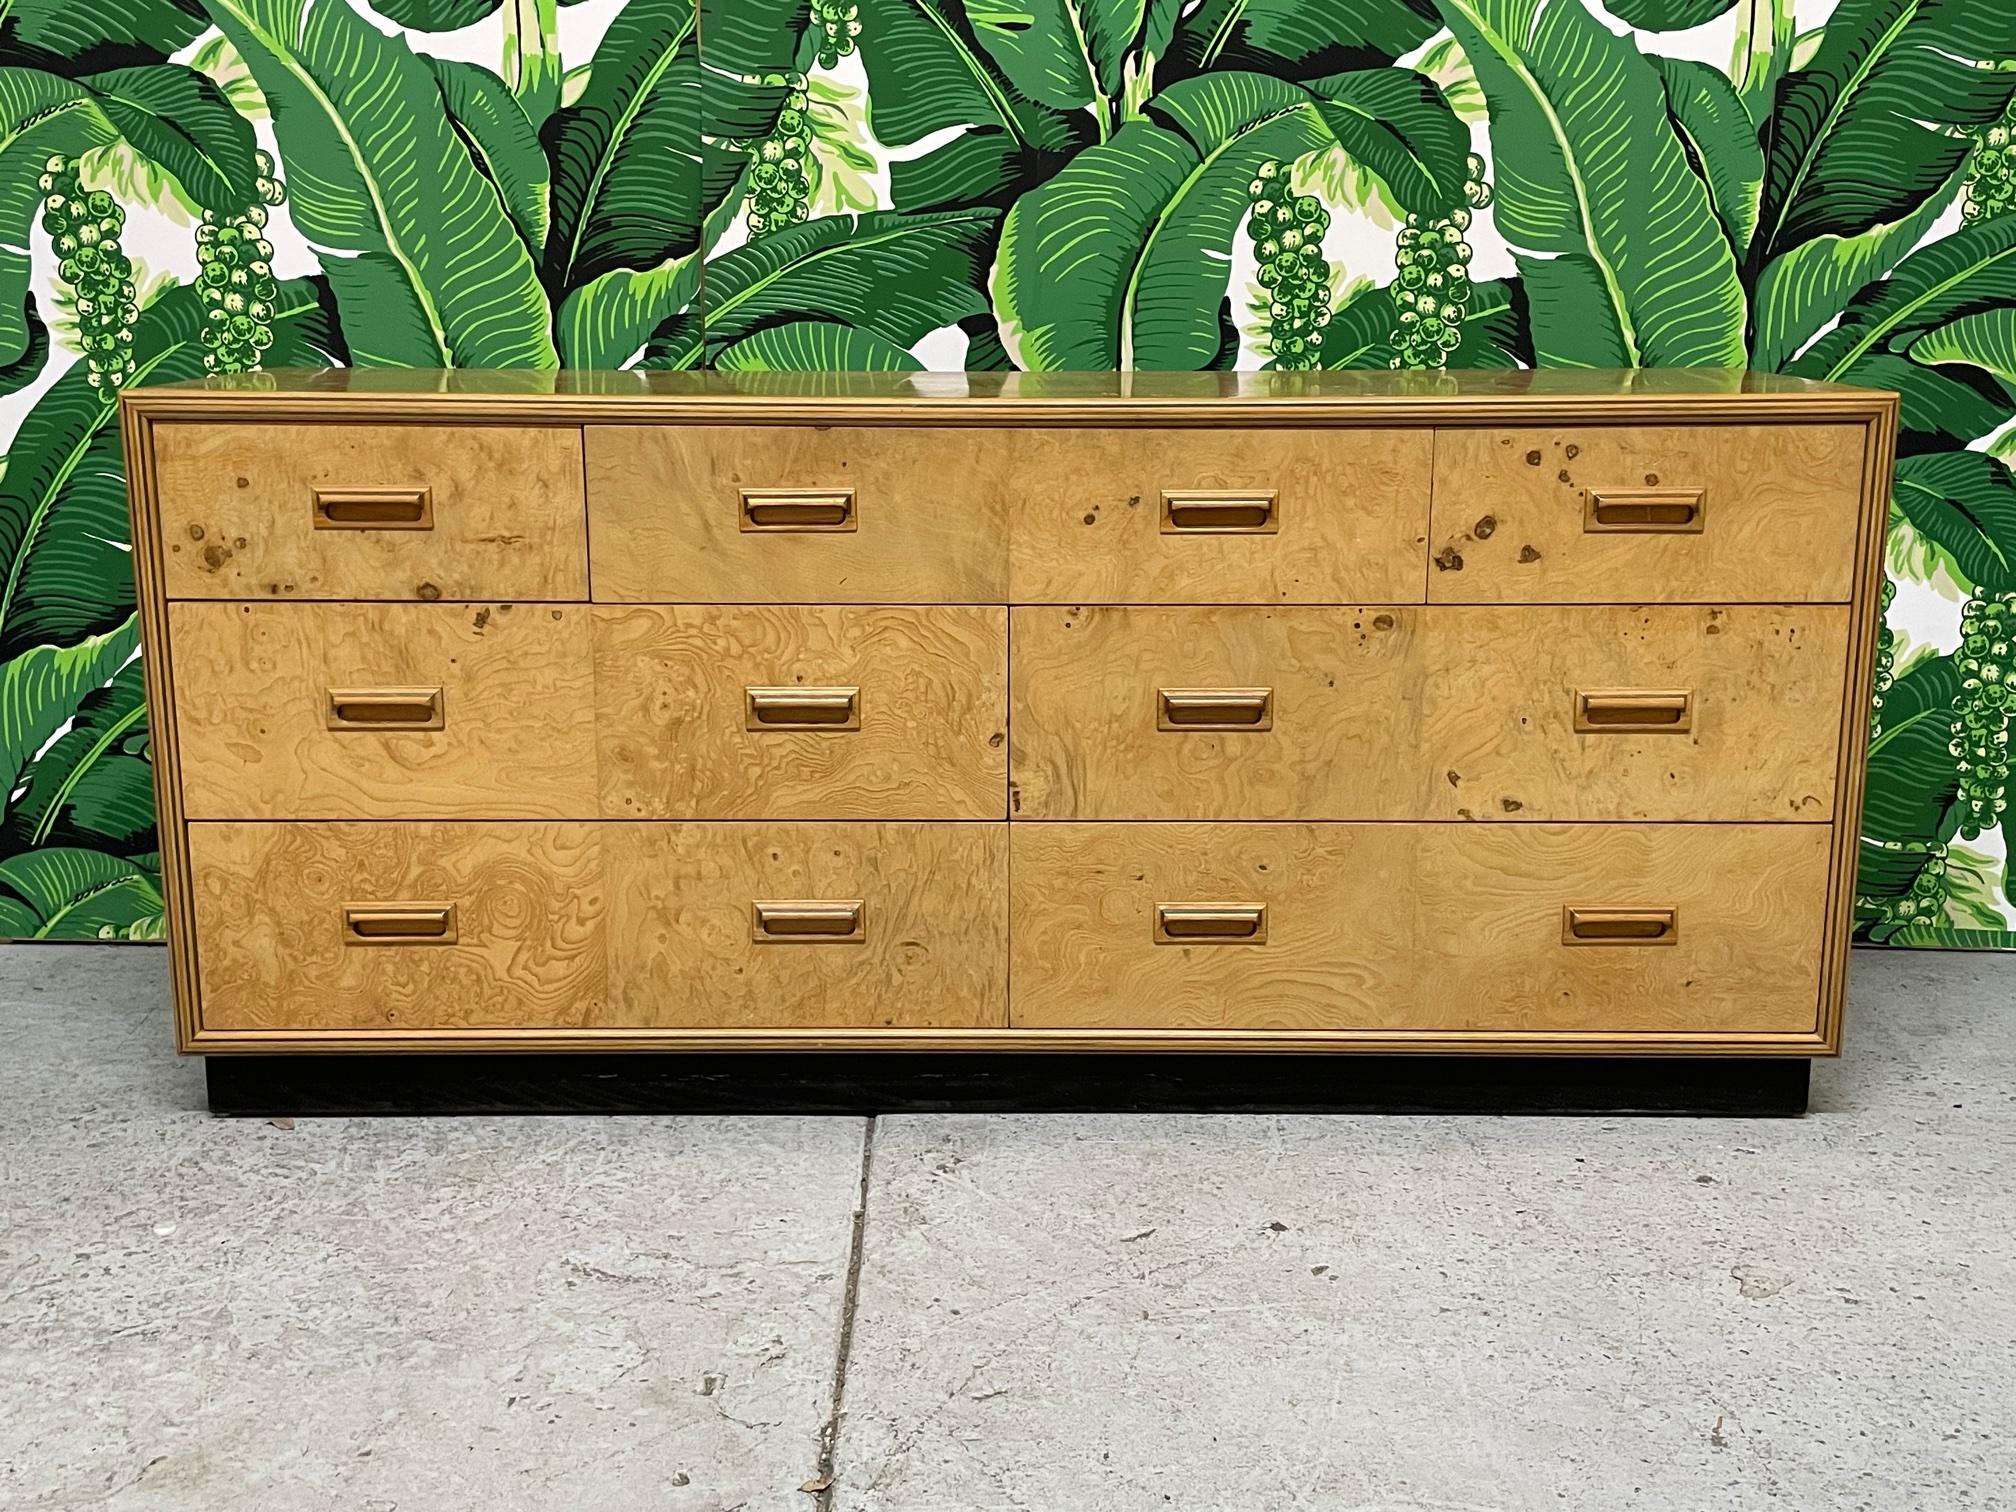 Burl wood dresser by Henredon from their Scene Two collection. Features 7 drawers, burl olive drawers and Macassar ebony Inlays, and inlaid sculpted wood pulls. Good condition with minor imperfections consistent with age.